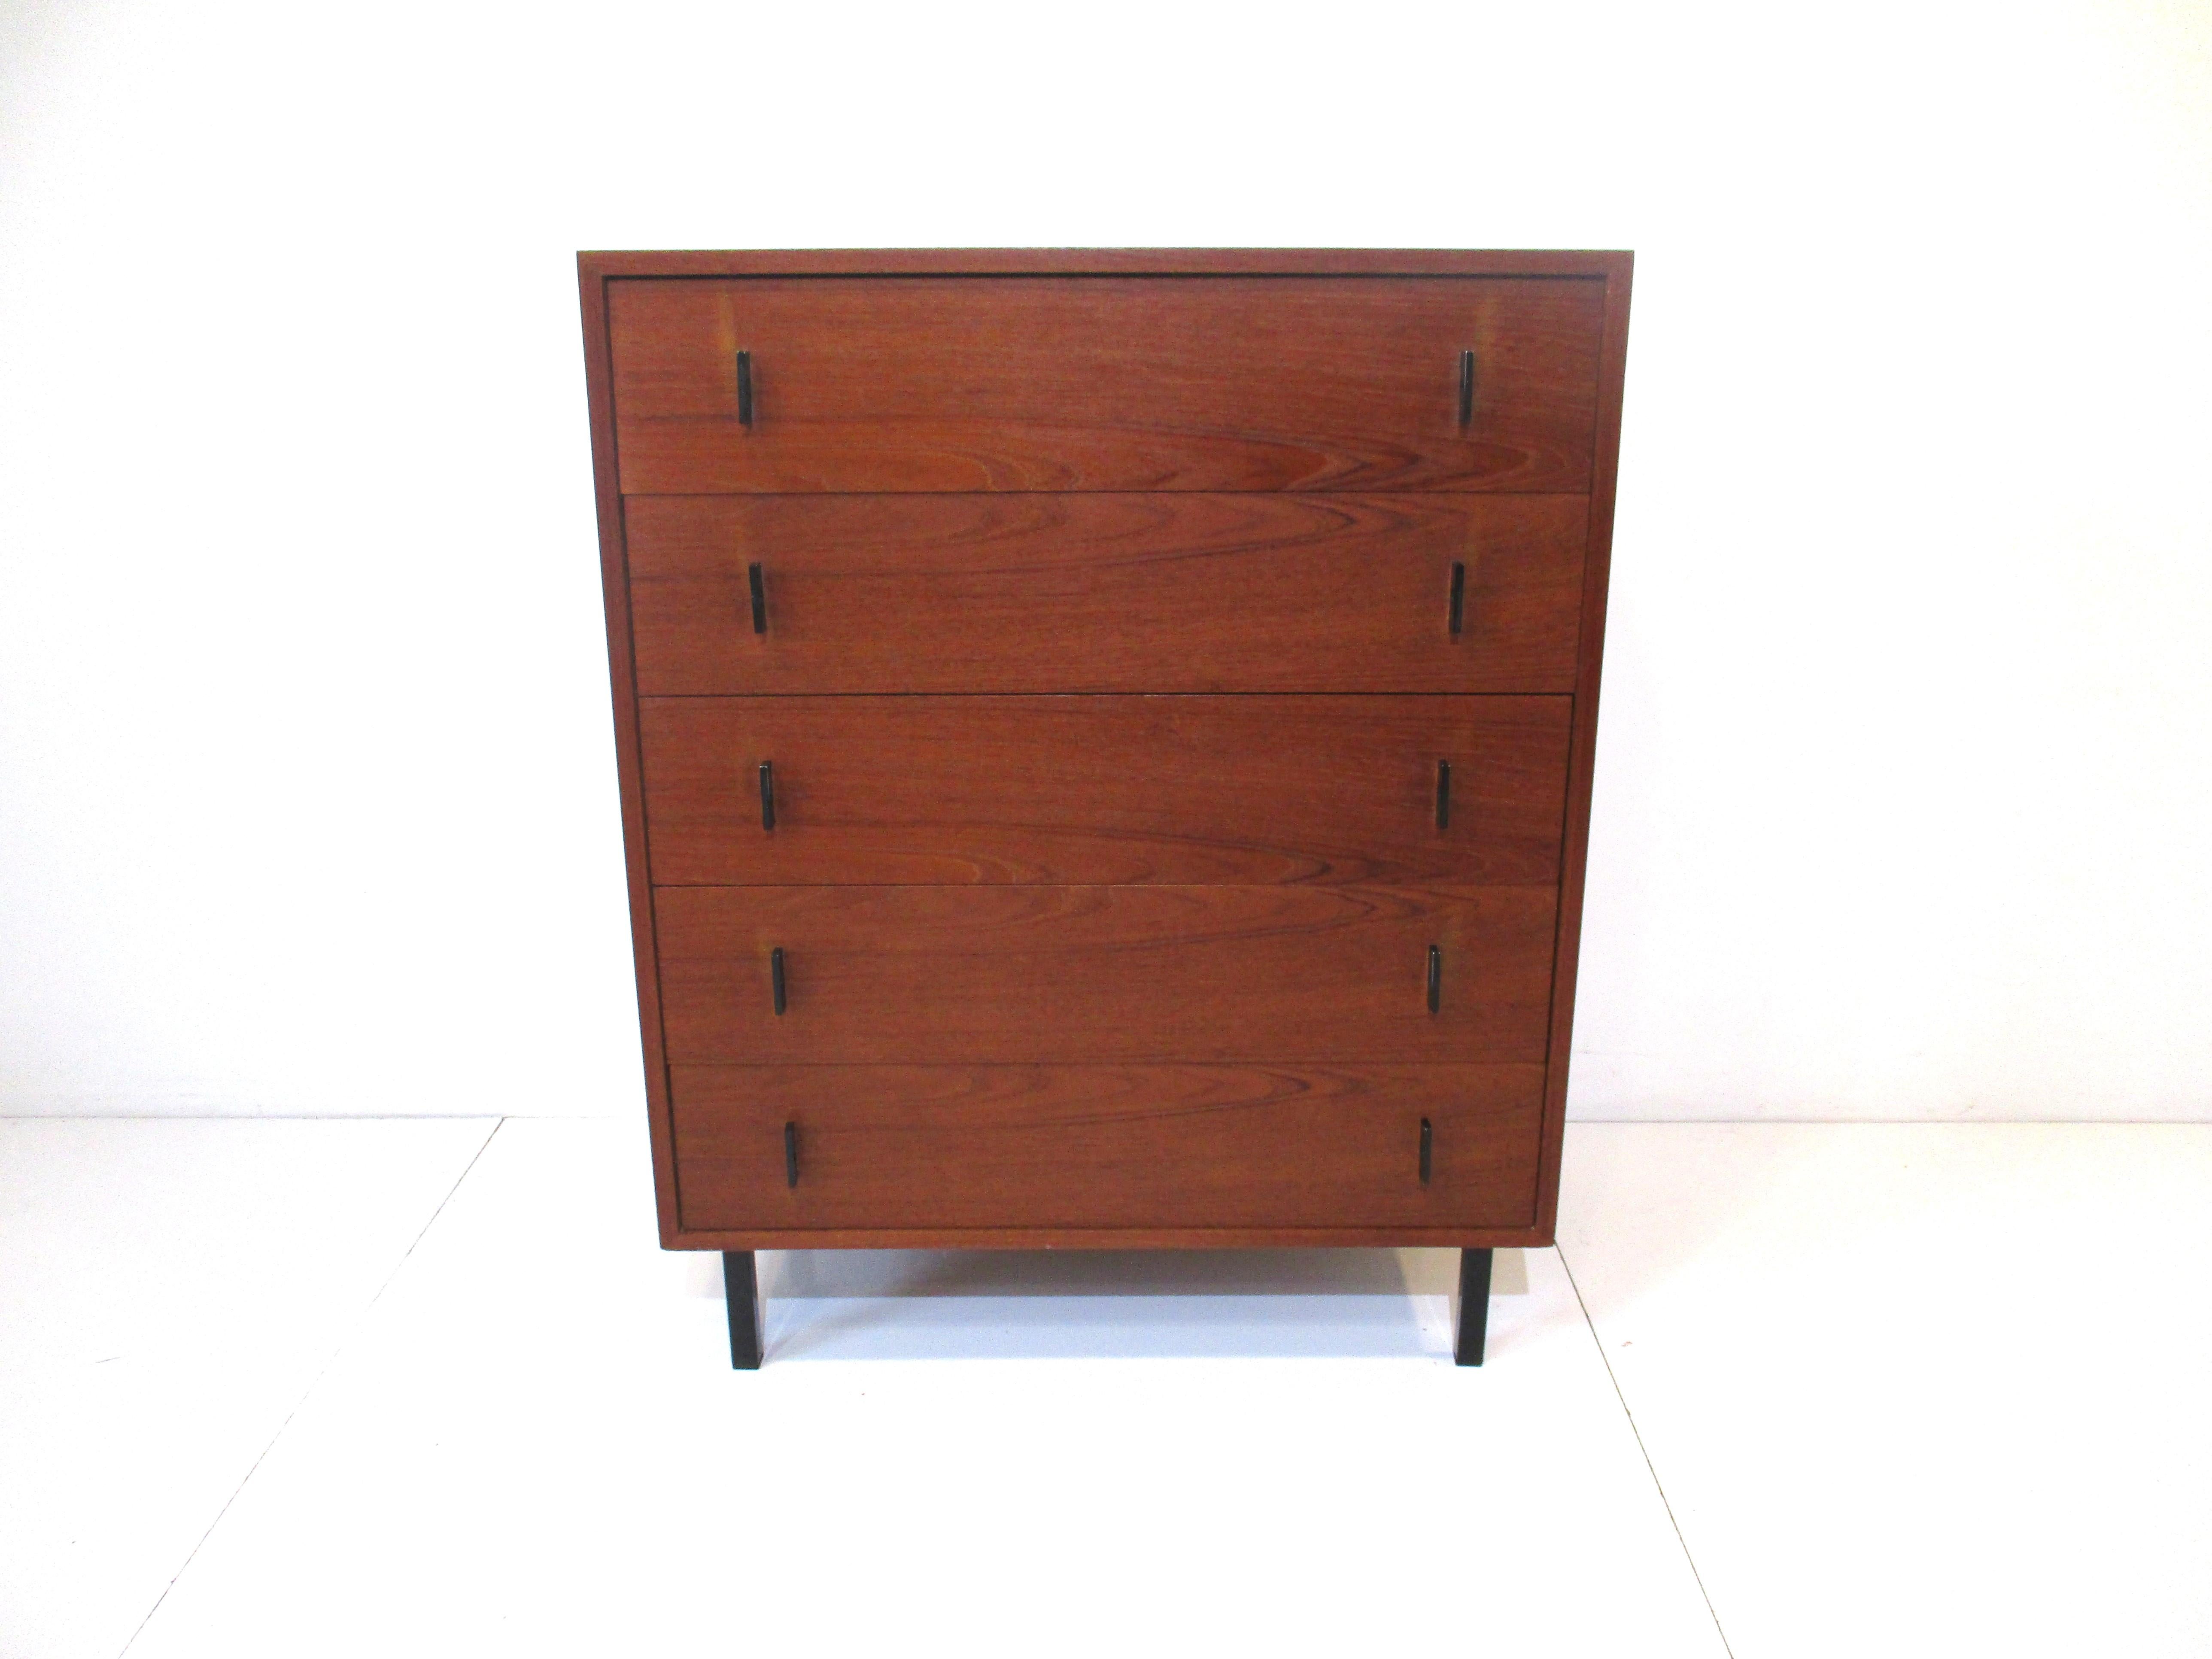 A very well crafted medium dark teak wood tall dresser chest with satin black metal pulls and legs. The pulls have a nice hole design giving the piece more detail, having plenty of storage and style in the manner of Arne Jacobsen.